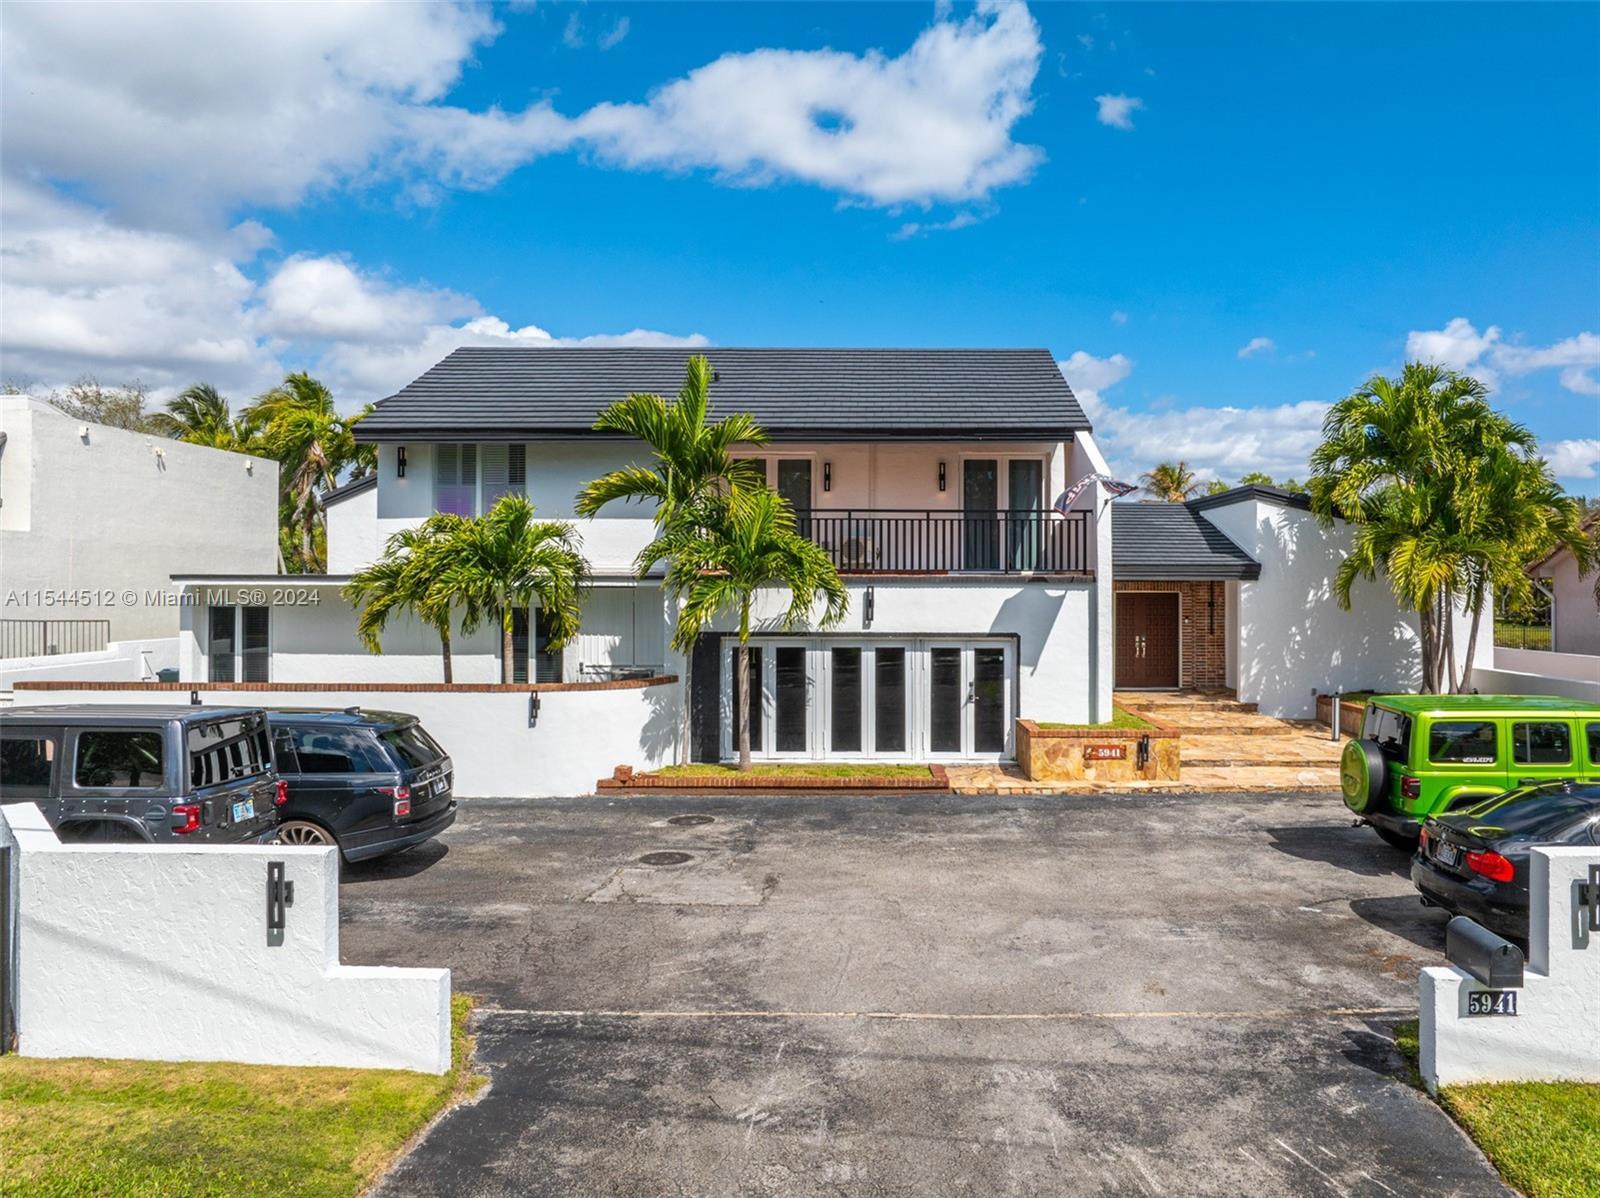 Nestled on the border of South Miami & Pinecrest, this 2-story waterfront mansion offers the epitome